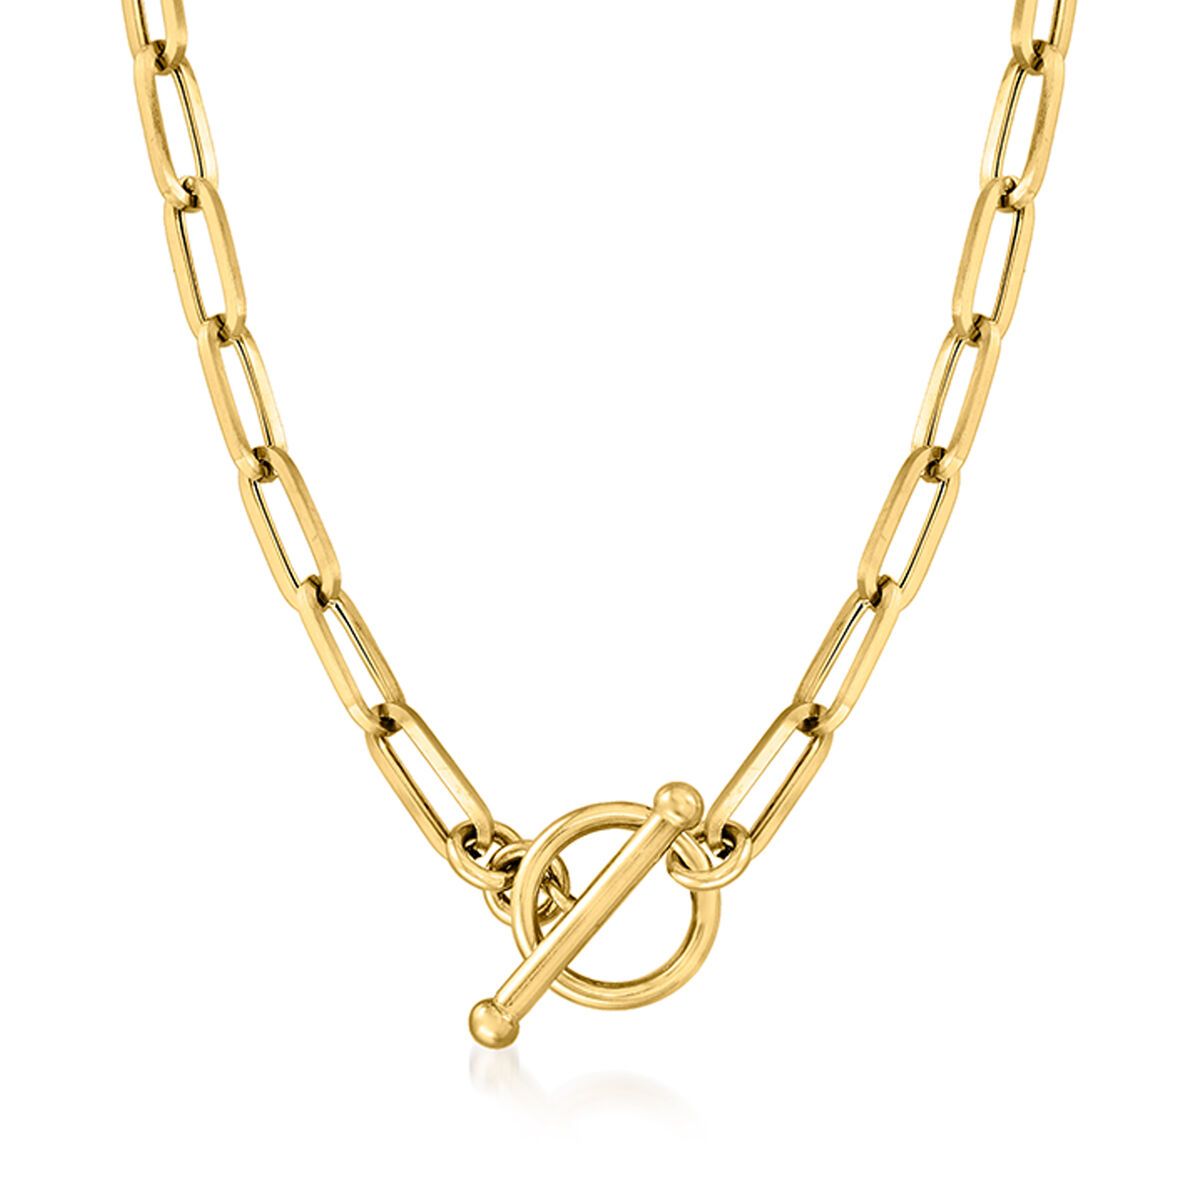 Italian 14kt Yellow Gold Paper Clip Link Toggle Necklace. 16" | Ross-Simons